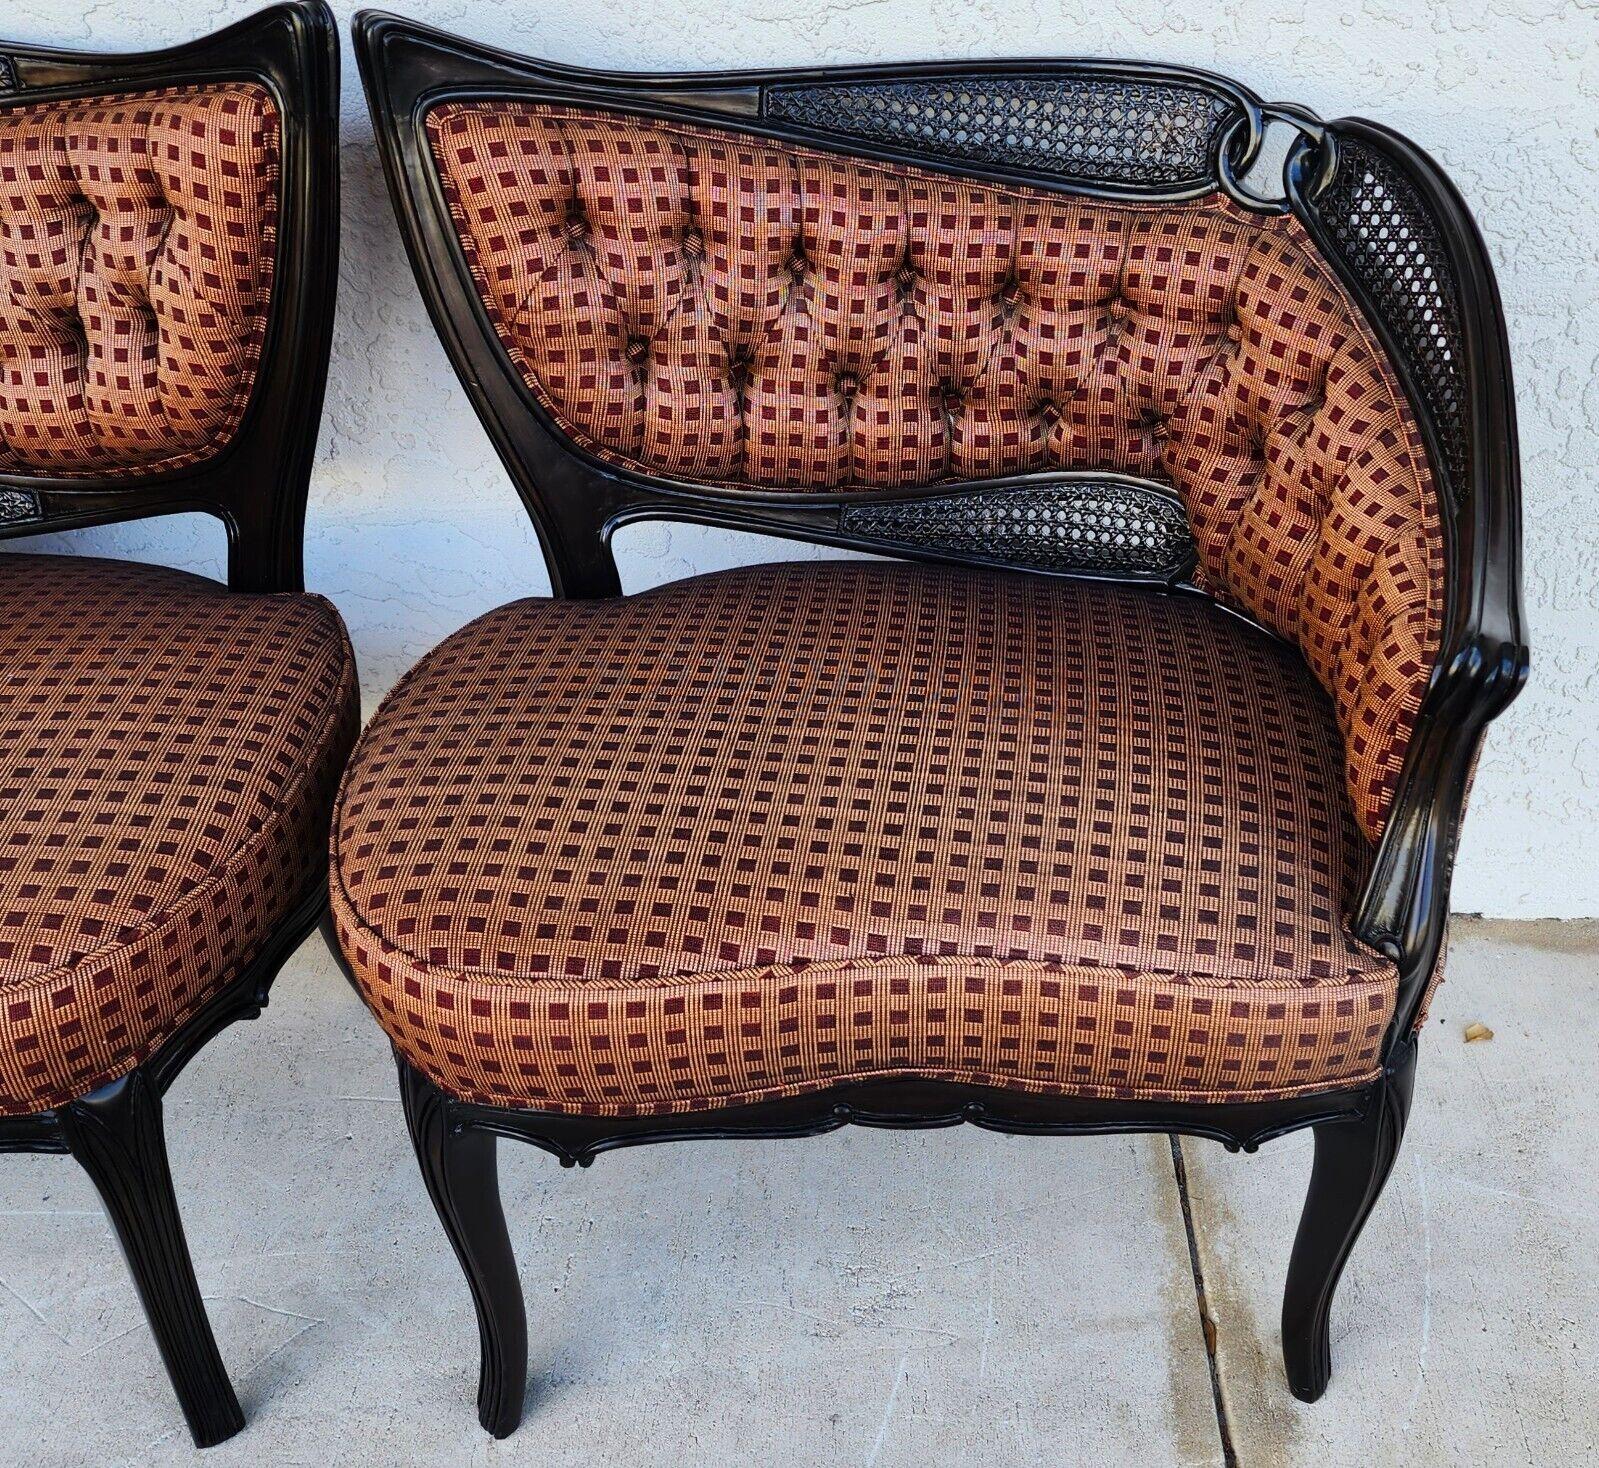 For FULL item description click on CONTINUE READING at the bottom of this page.

Offering One Of Our Recent Palm Beach Estate Fine Furniture Acquisitions Of A
Pair of Sculptural Antique Parlor Chairs
With ebonized frames, tufted and caned backs, and